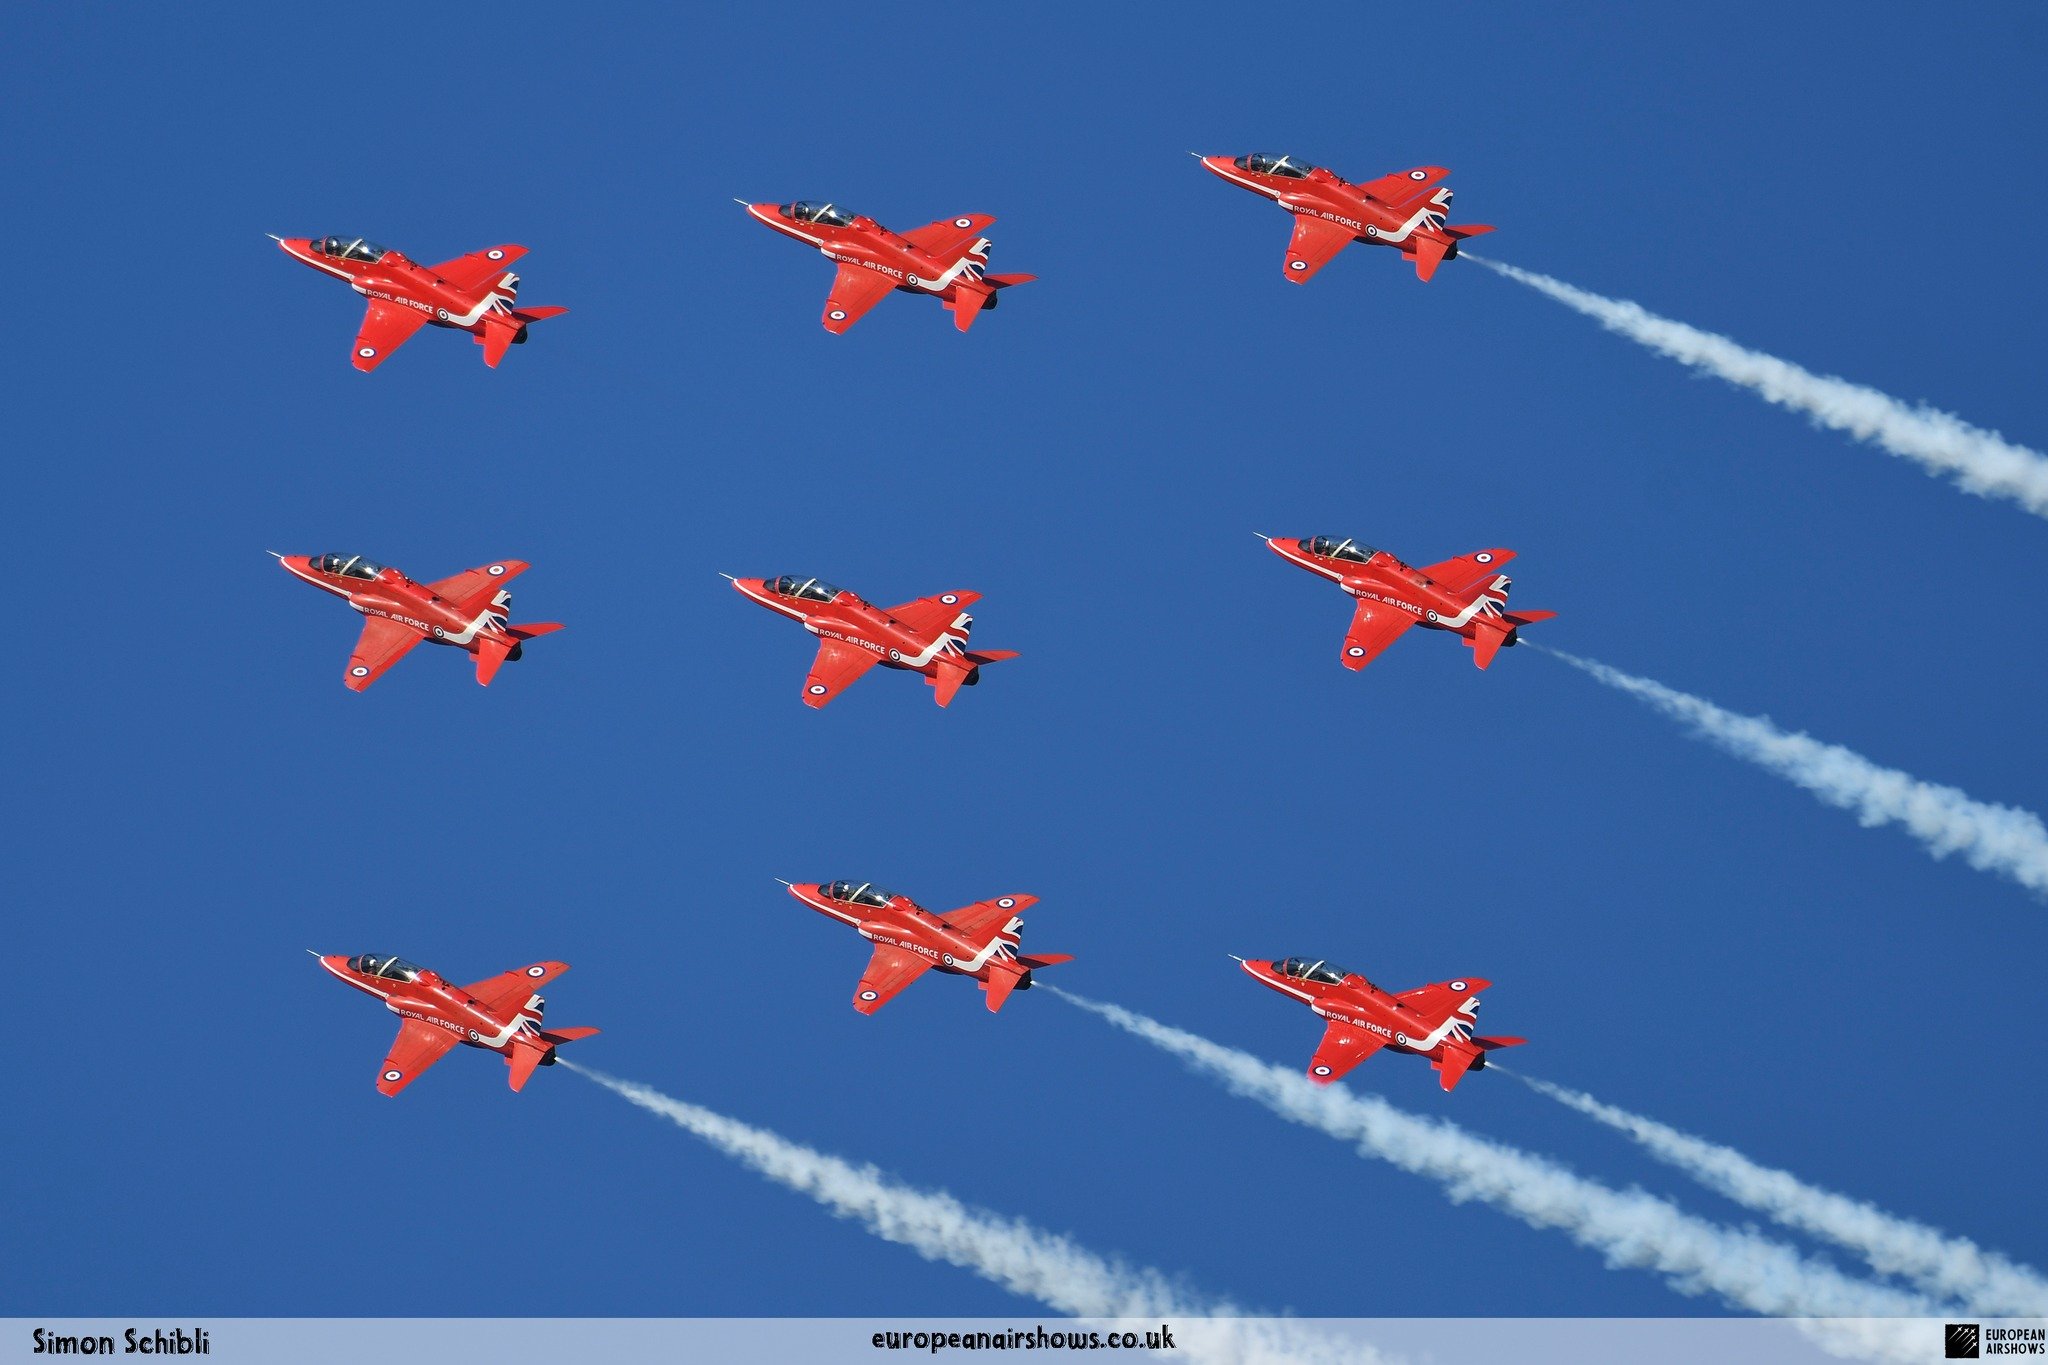 #Onthisday📅 6 May 1965, @rafredarrows performed their first display.

The Red Arrows, officially known as the Royal Air Force Aerobatic Team, is the Royal Air Force's aerobatic display team based at RAF Waddington. The team performed its first displ